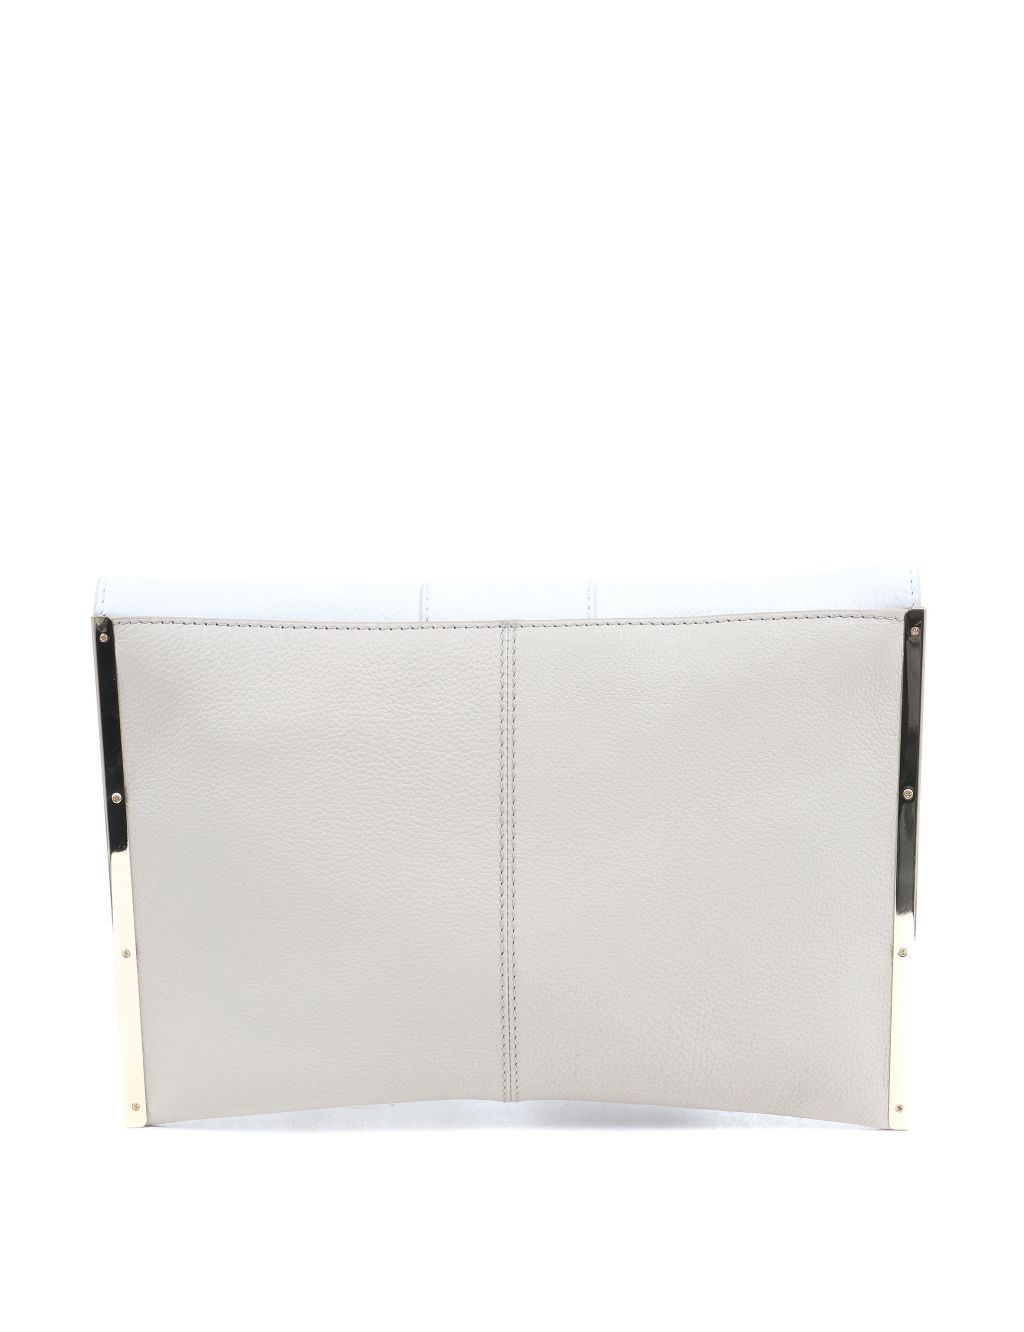 Leather Clutch Bag image 3